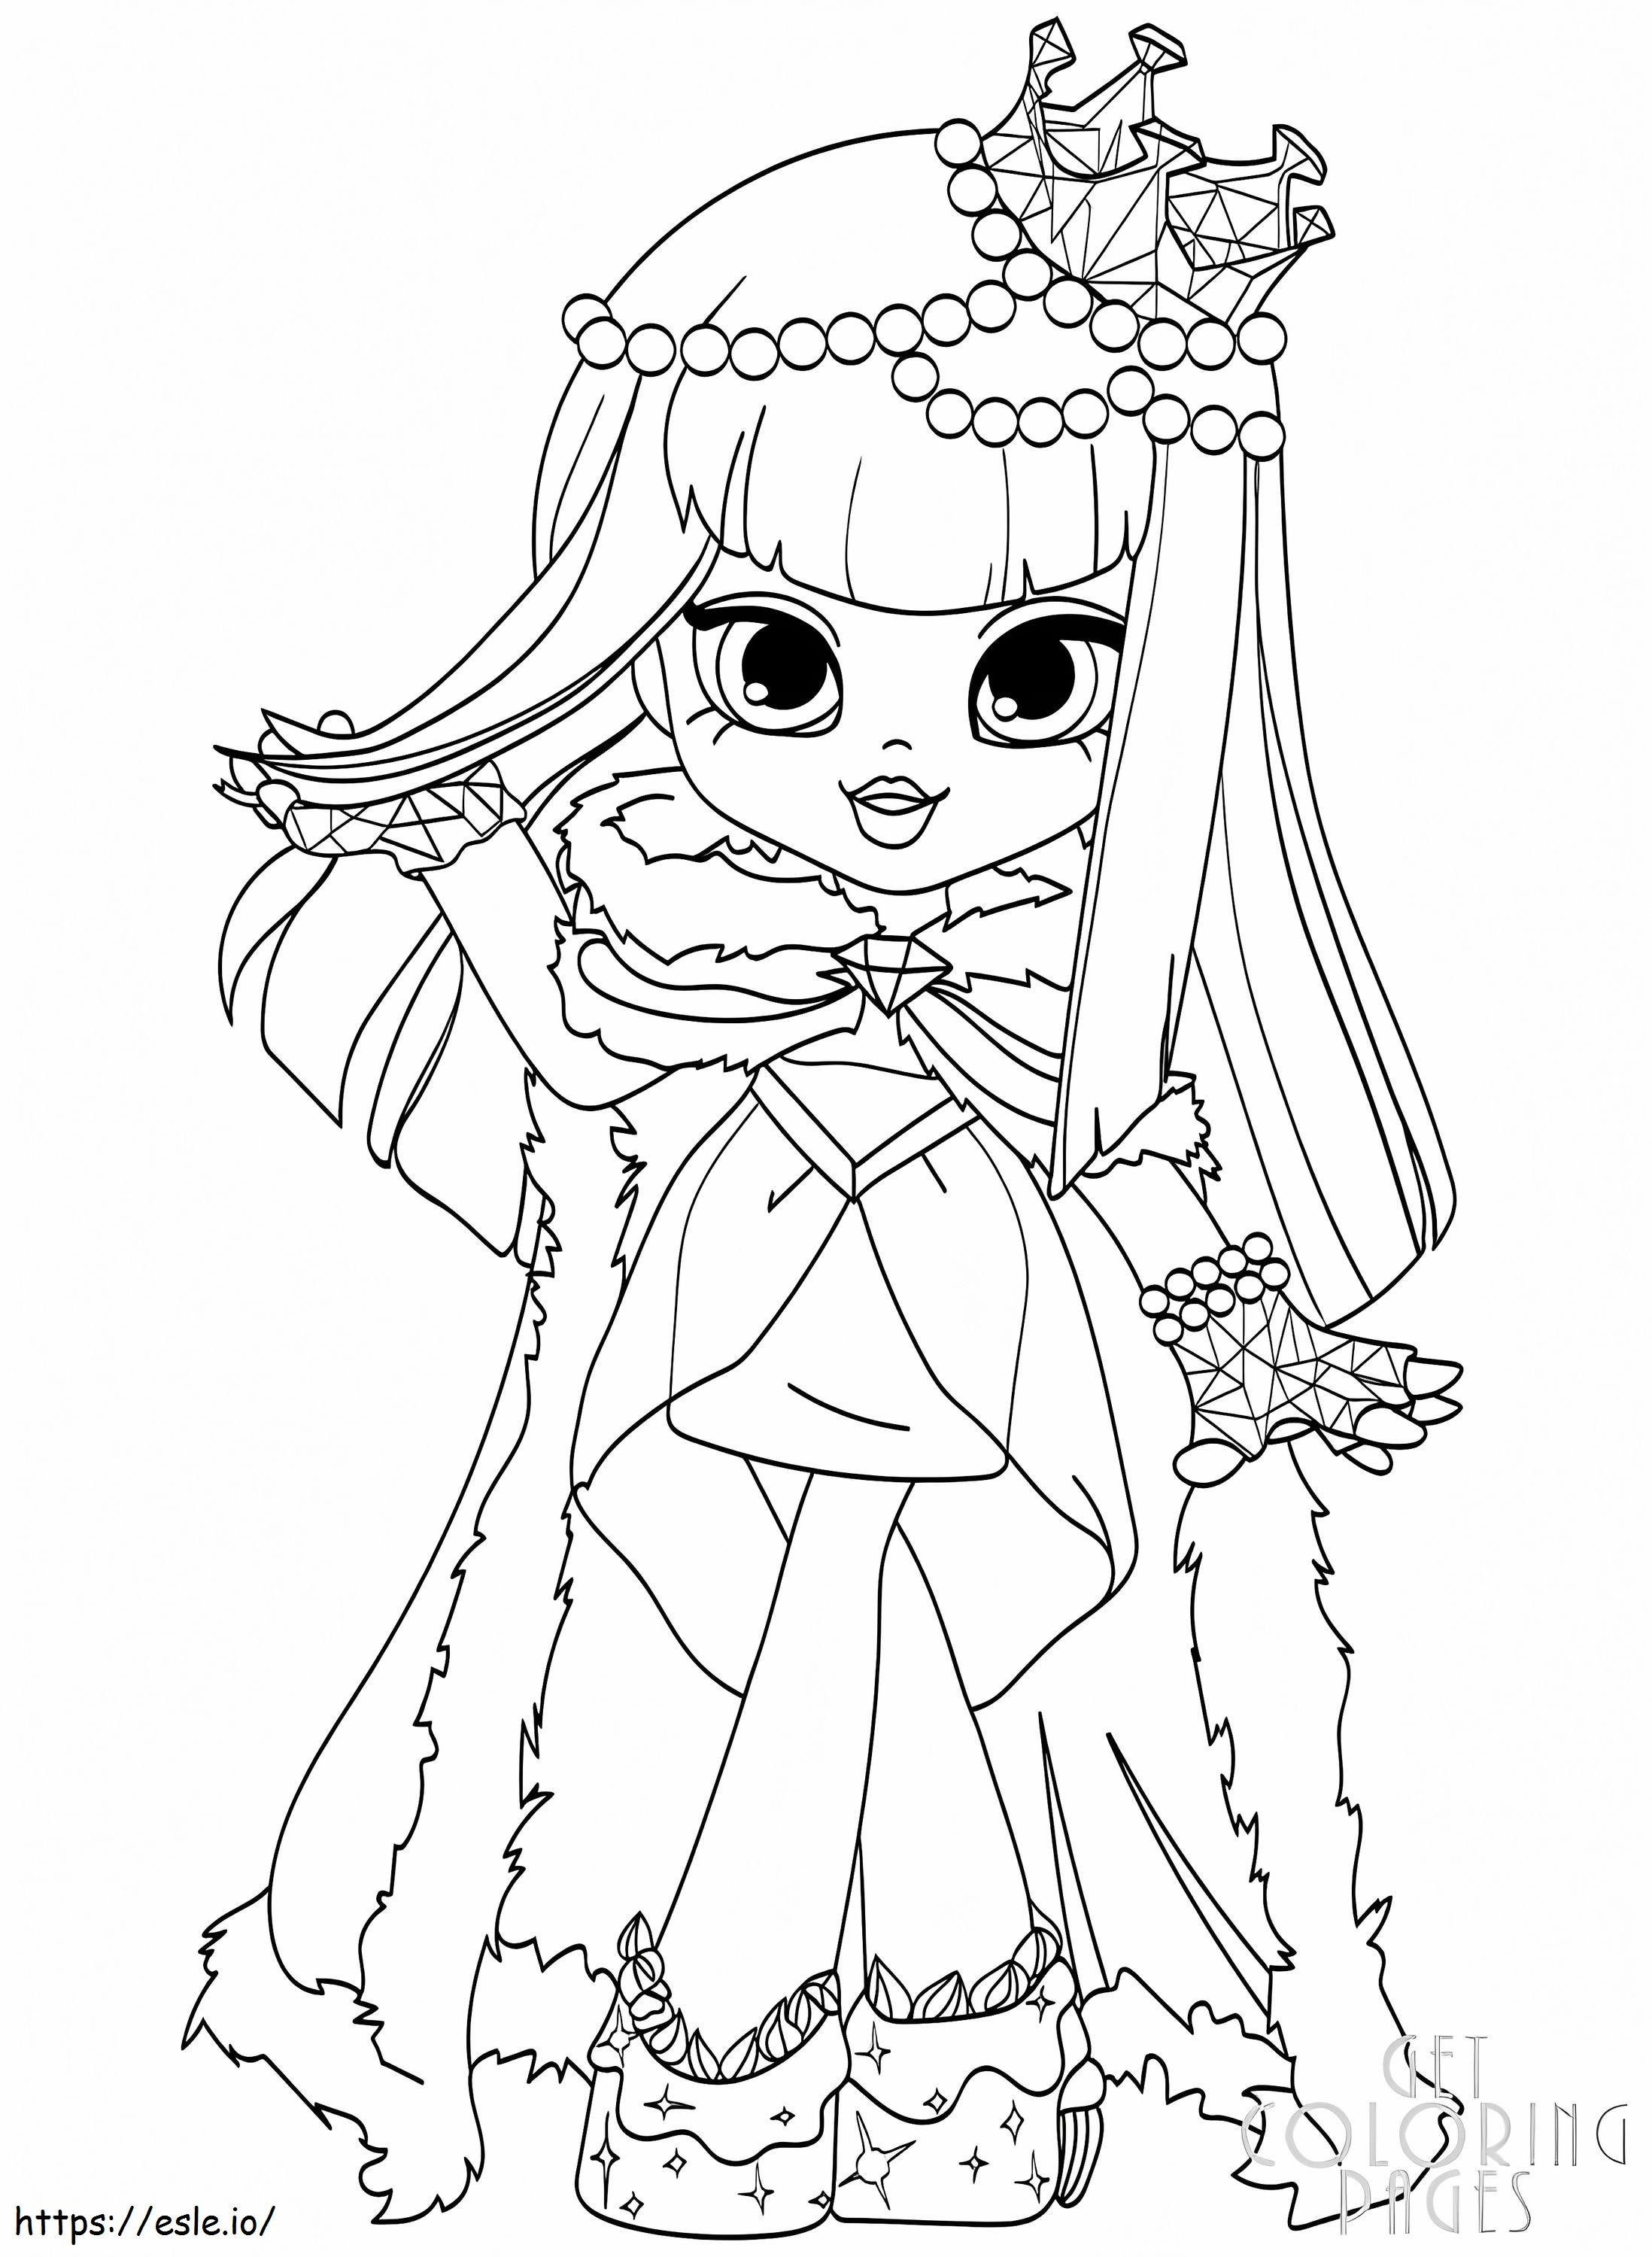 Cute Shopkins Shoppies coloring page